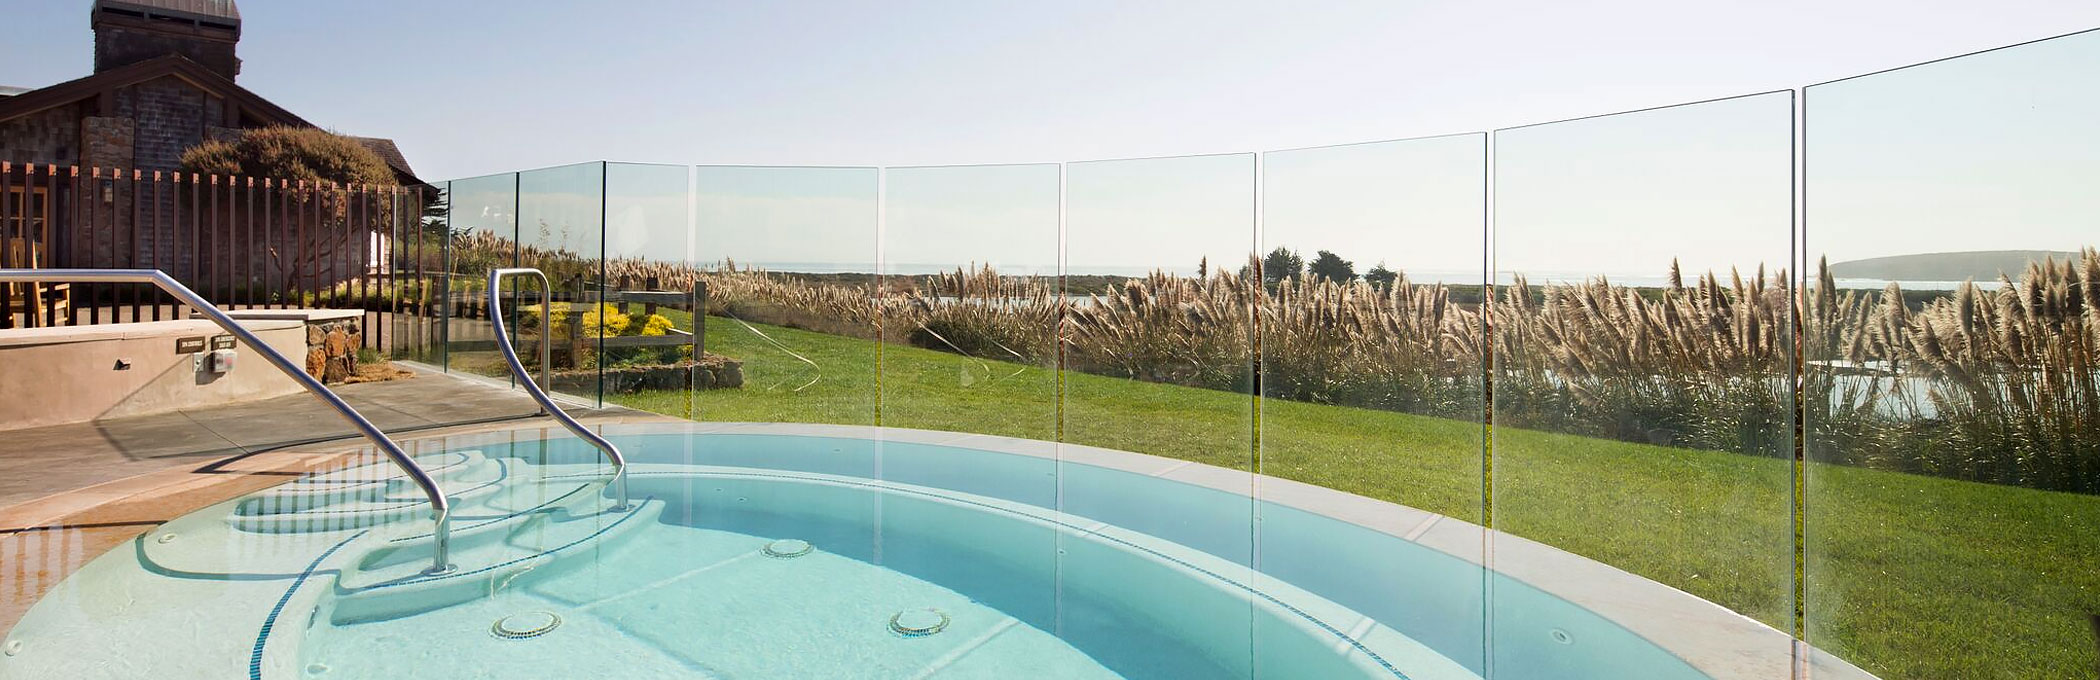 Enclosed room outdoor hot tub with see through panels to the outdoors